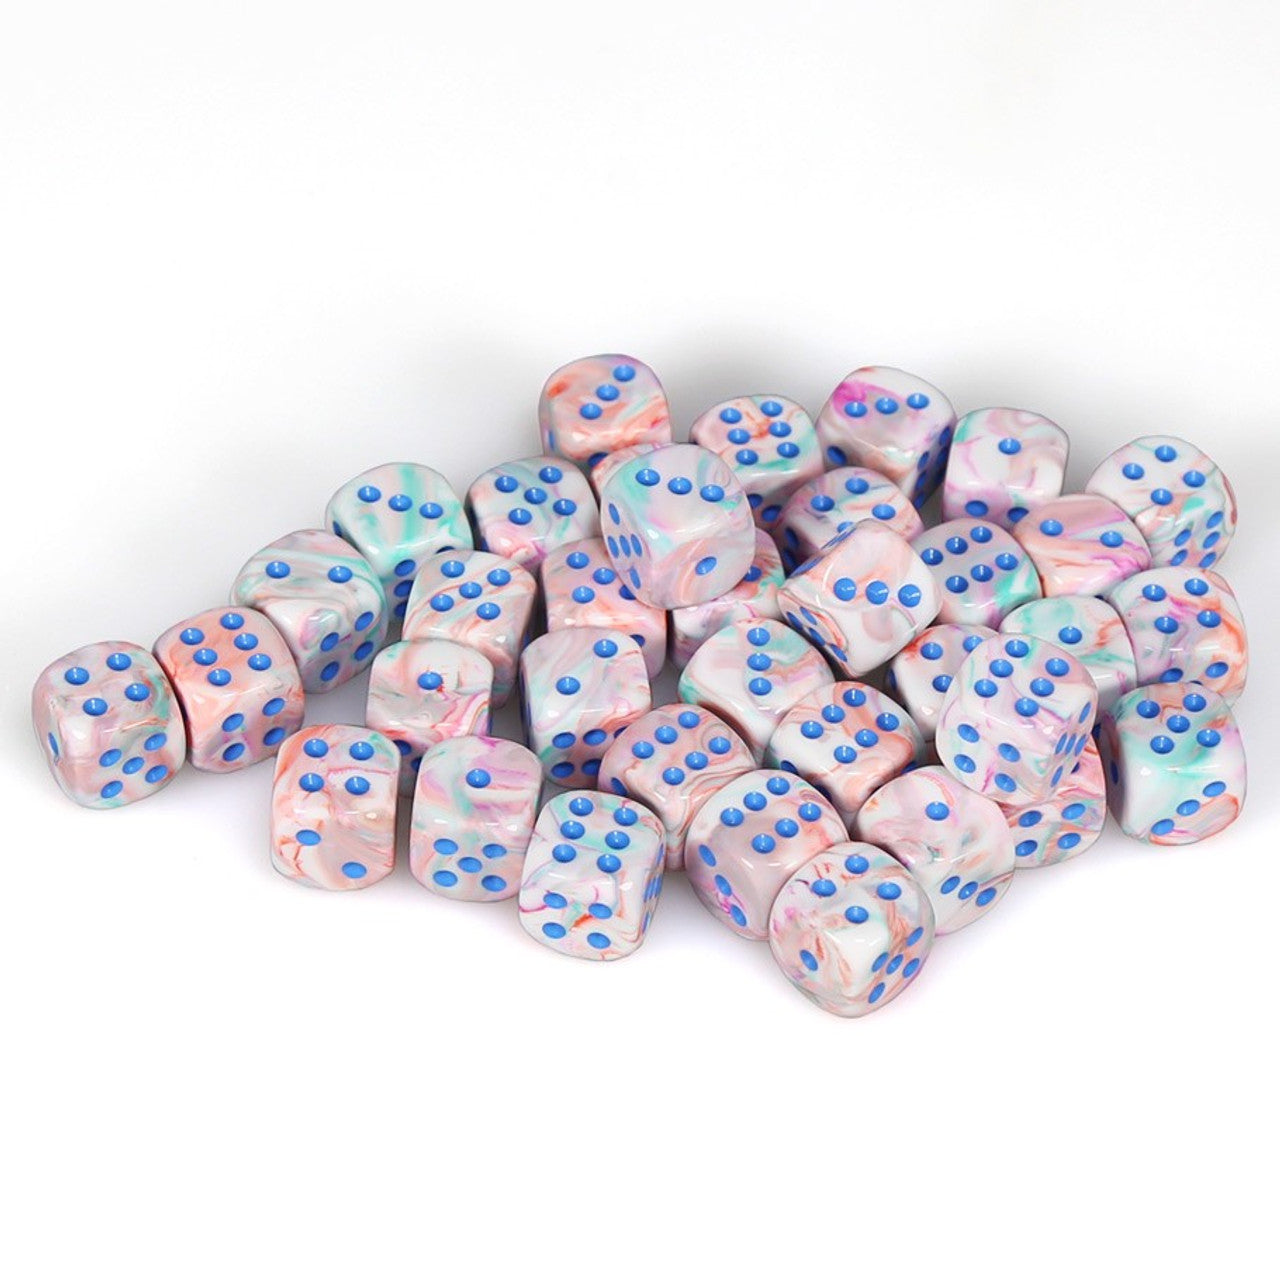 Chessex 16mm d6 with pips Dice Blocks (12 Dice) - Festive Polyhedral Pop Art /blue კამათელი